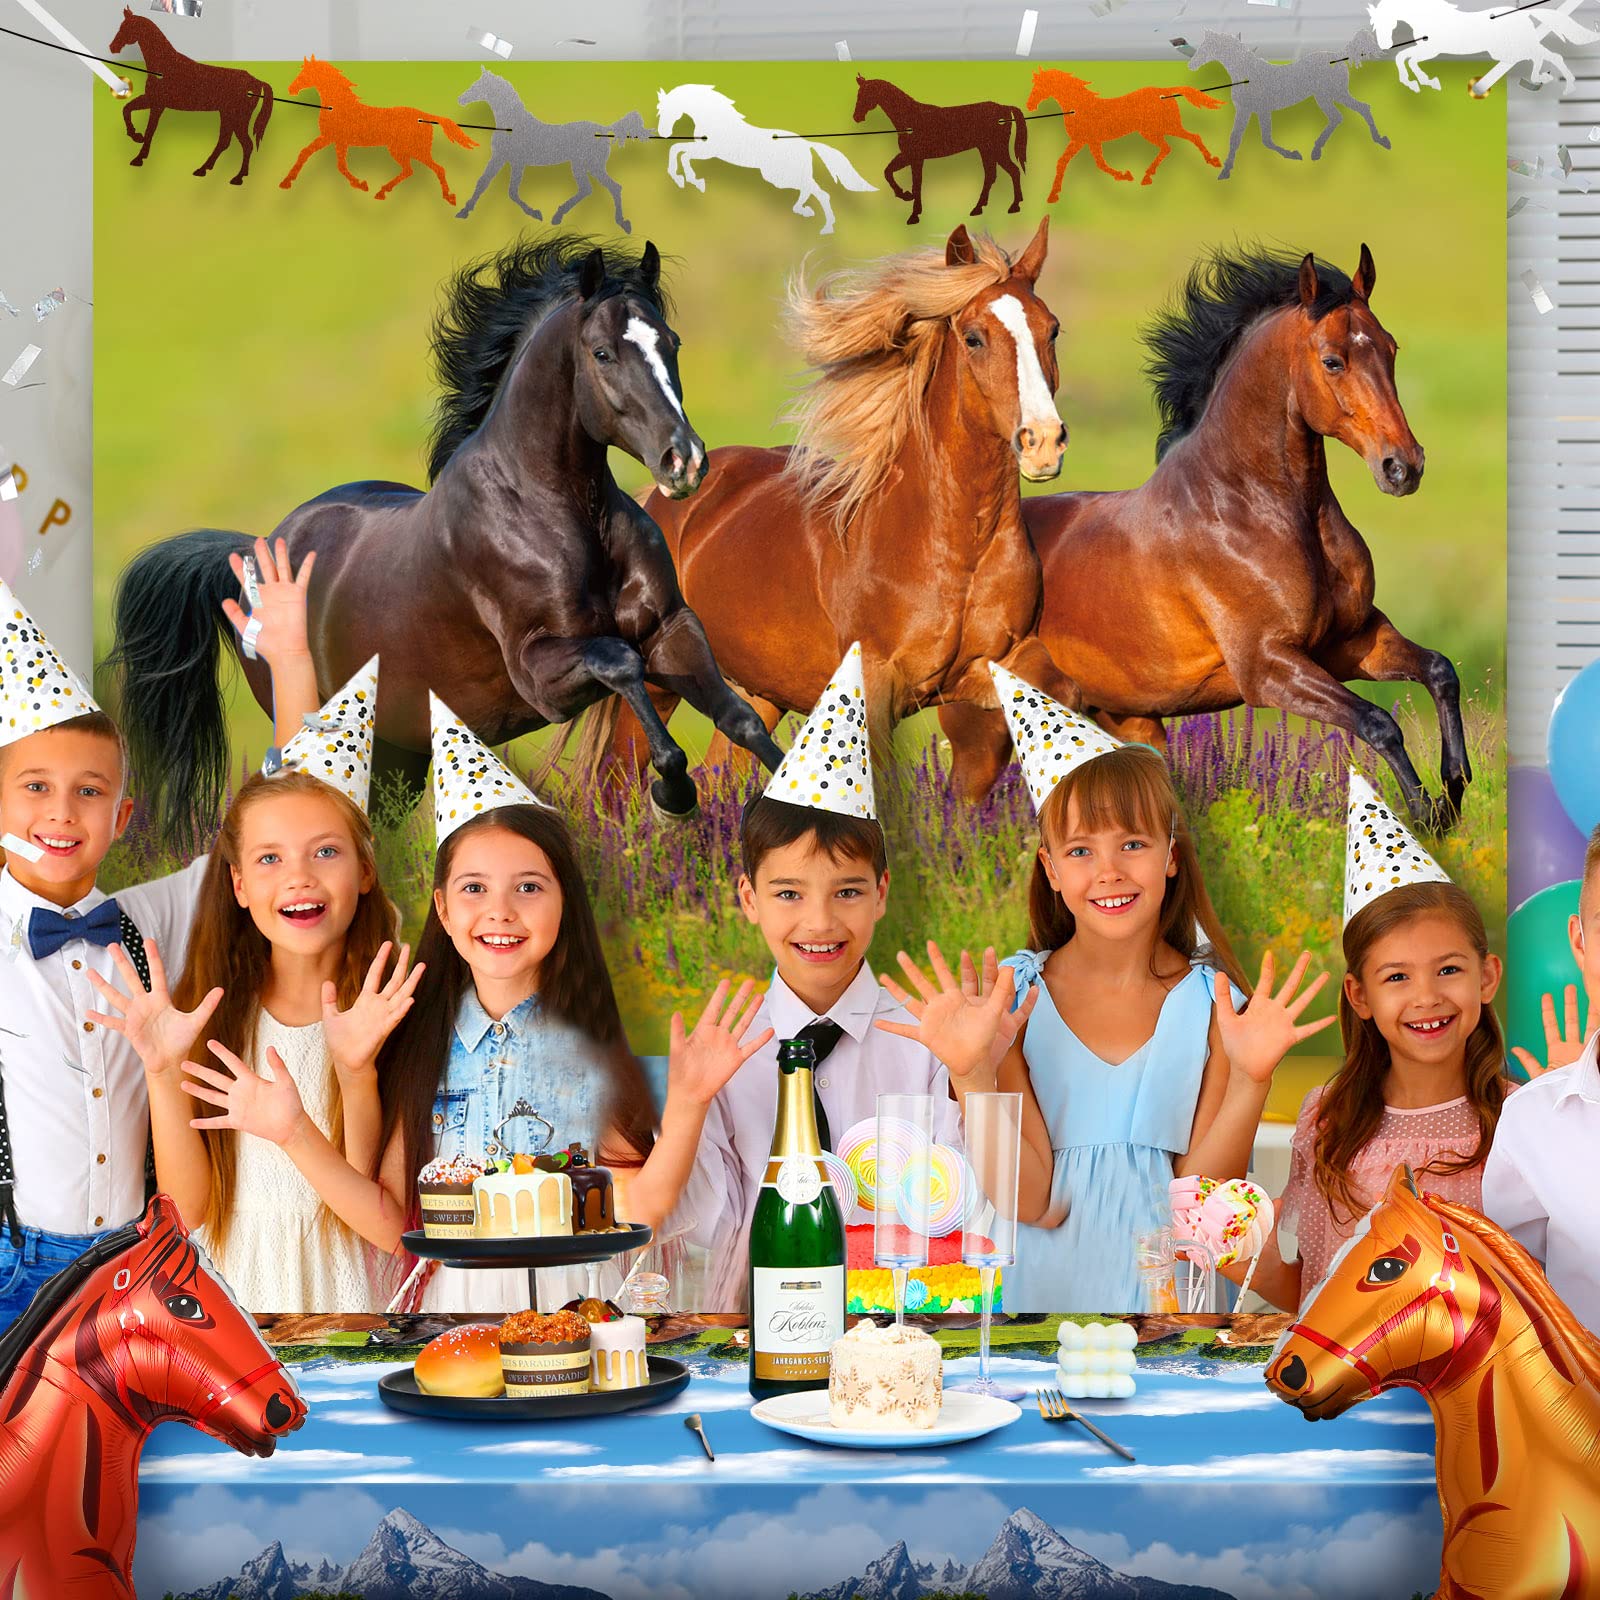 8 Pcs Horse Birthday Party Decorations Supplies Include Horse Garland Paper Banners Horse Plastic Tablecloths Horse Racing Decoration Backdrop Cowboy Cowgirl Horse Balloon